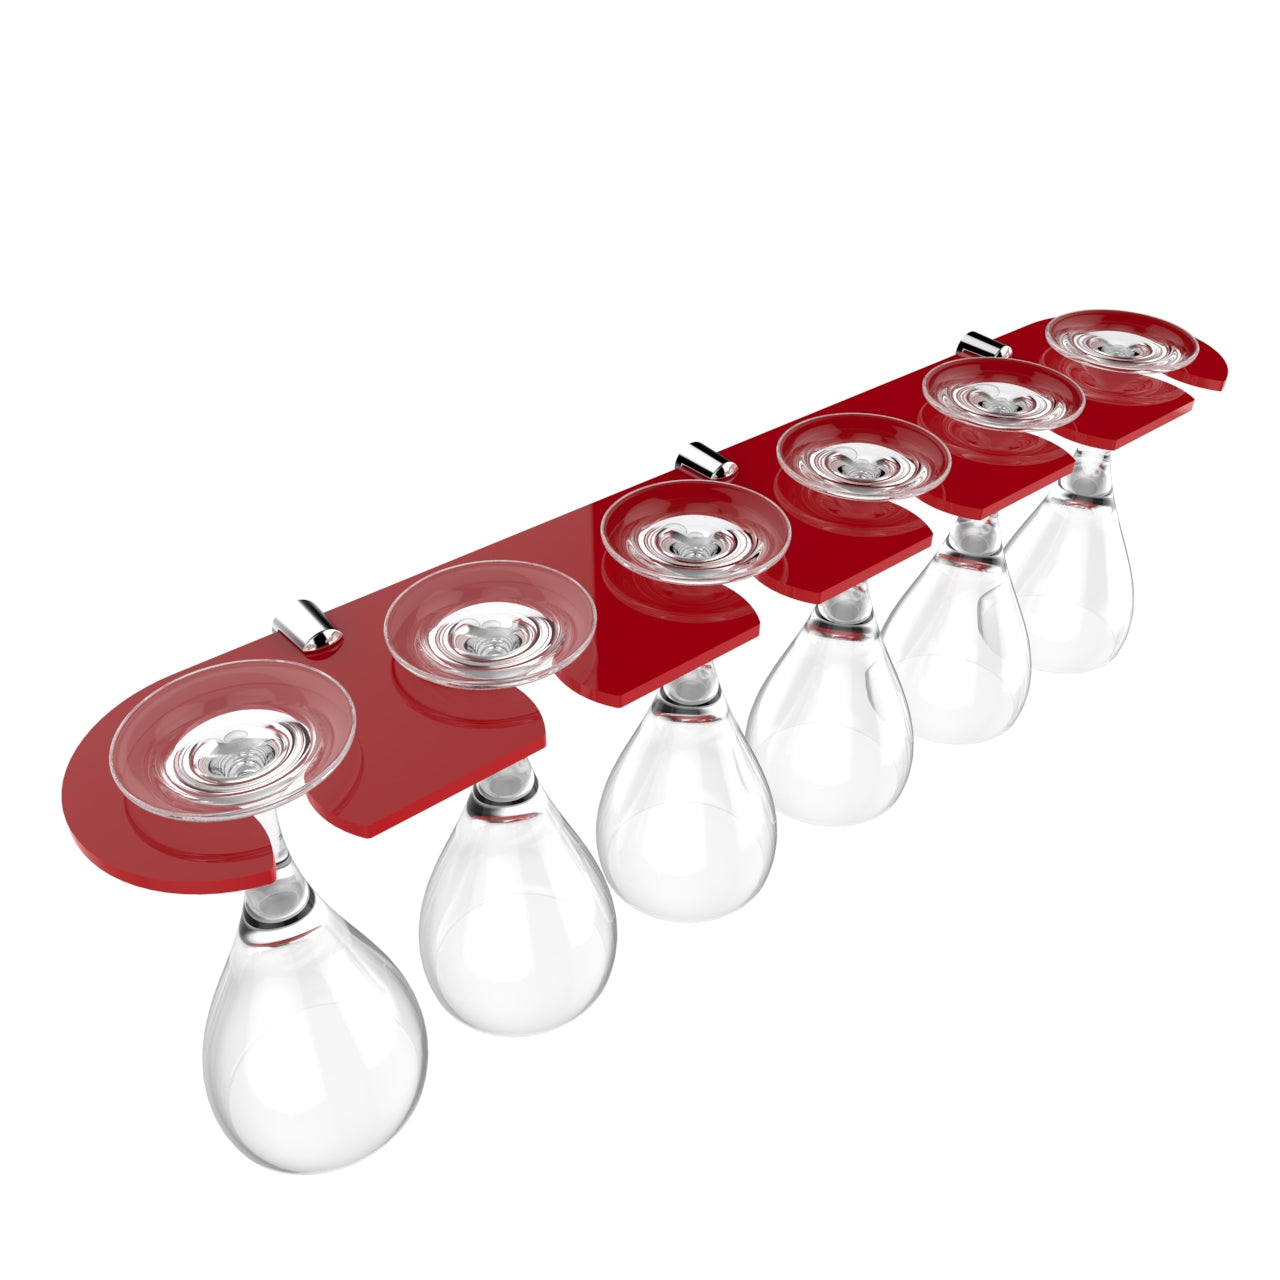 Straight Wine Glass Holder - Expression Products Ltd